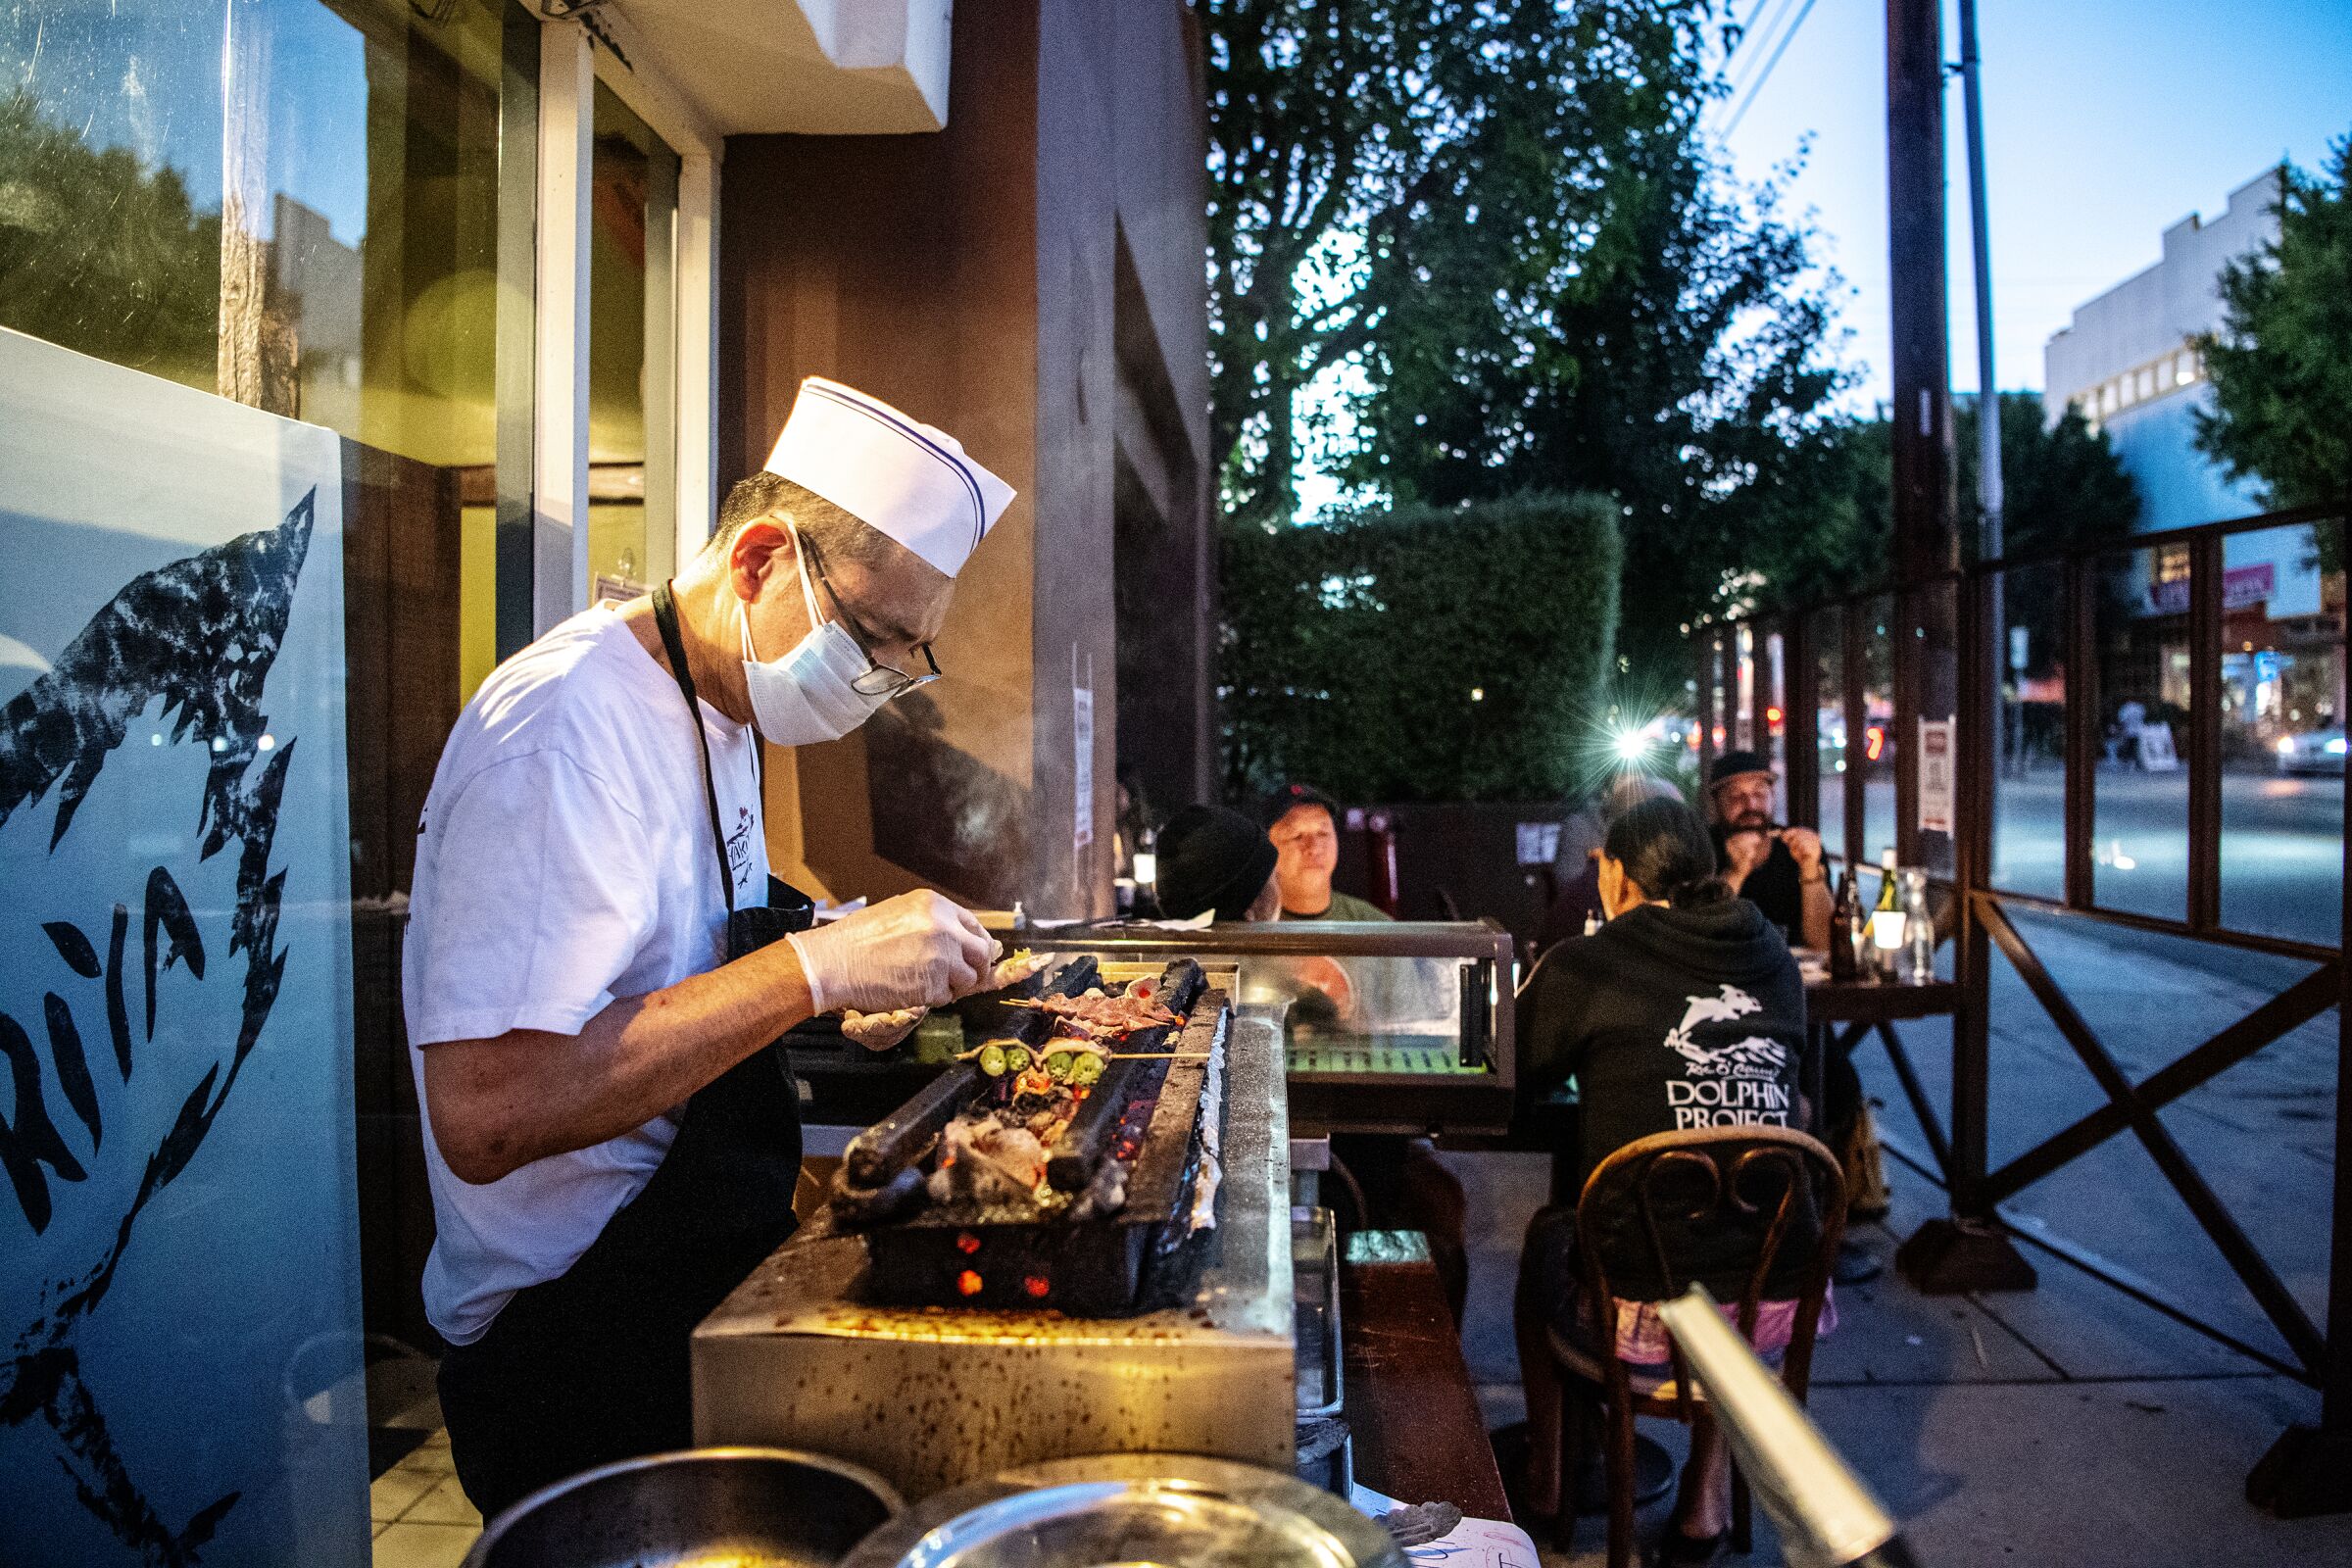 The outdoor dining scene at Yakitoriya in Los Angeles.